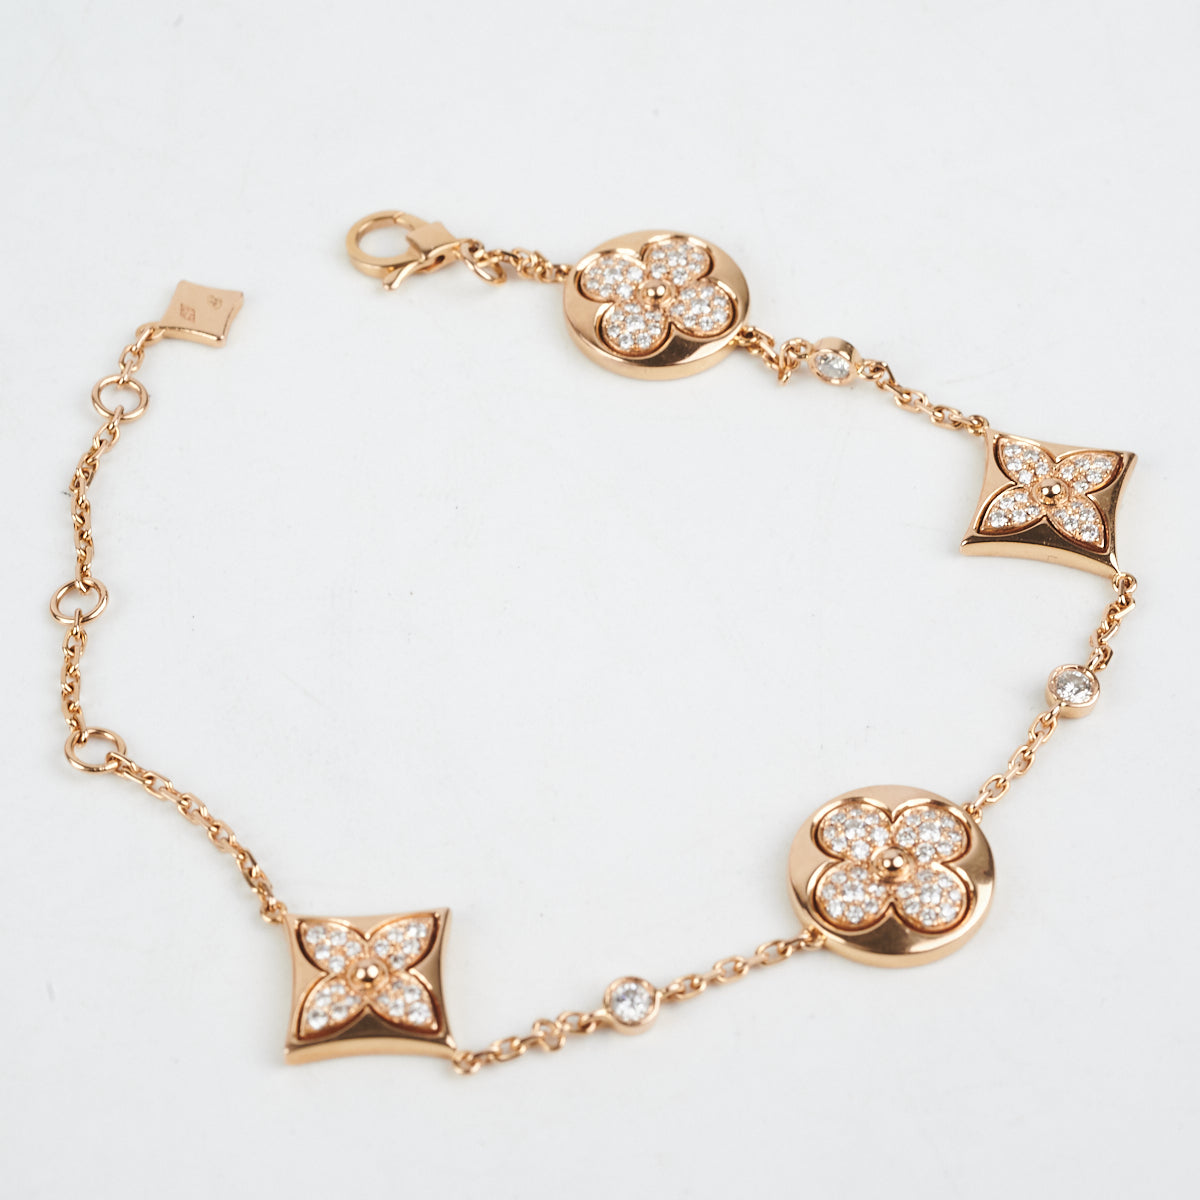 Louis Vuitton® Idylle Blossom Two-row Bracelet, Pink Gold And Diamonds